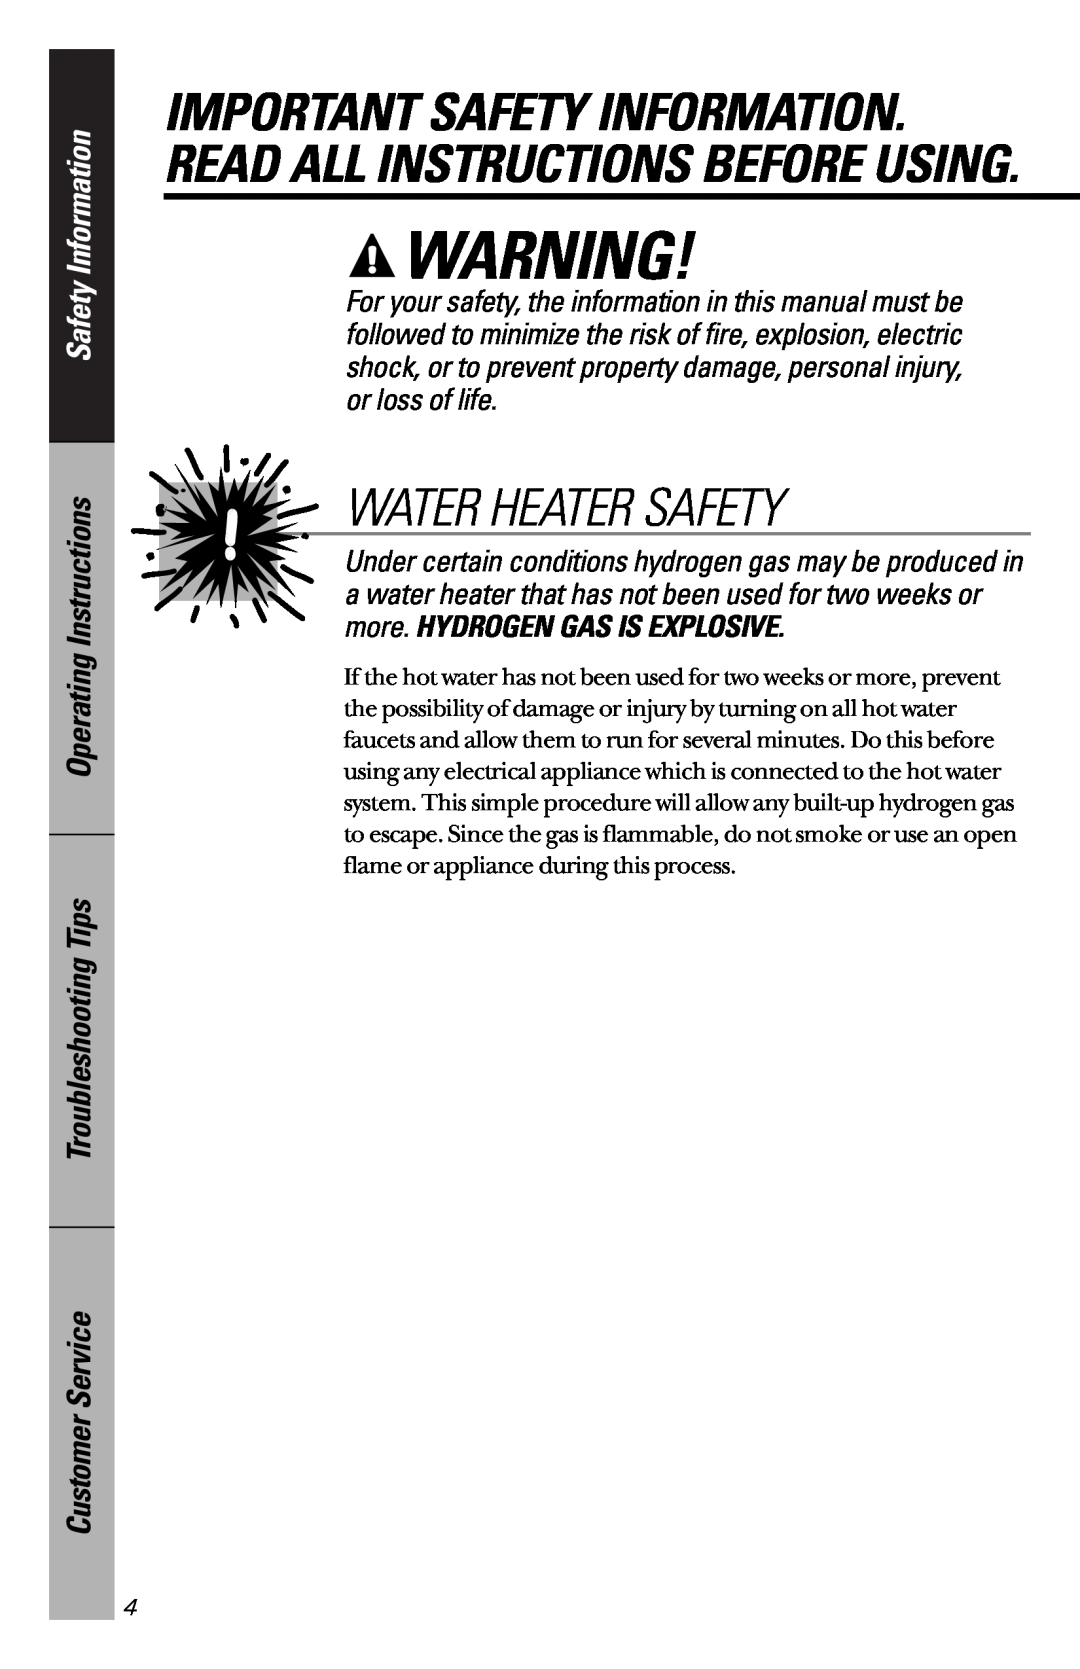 GE GSD5134, GSD5330, GSD5350, GSD5320 Water Heater Safety, Important Safety Information. Read All Instructions Before Using 